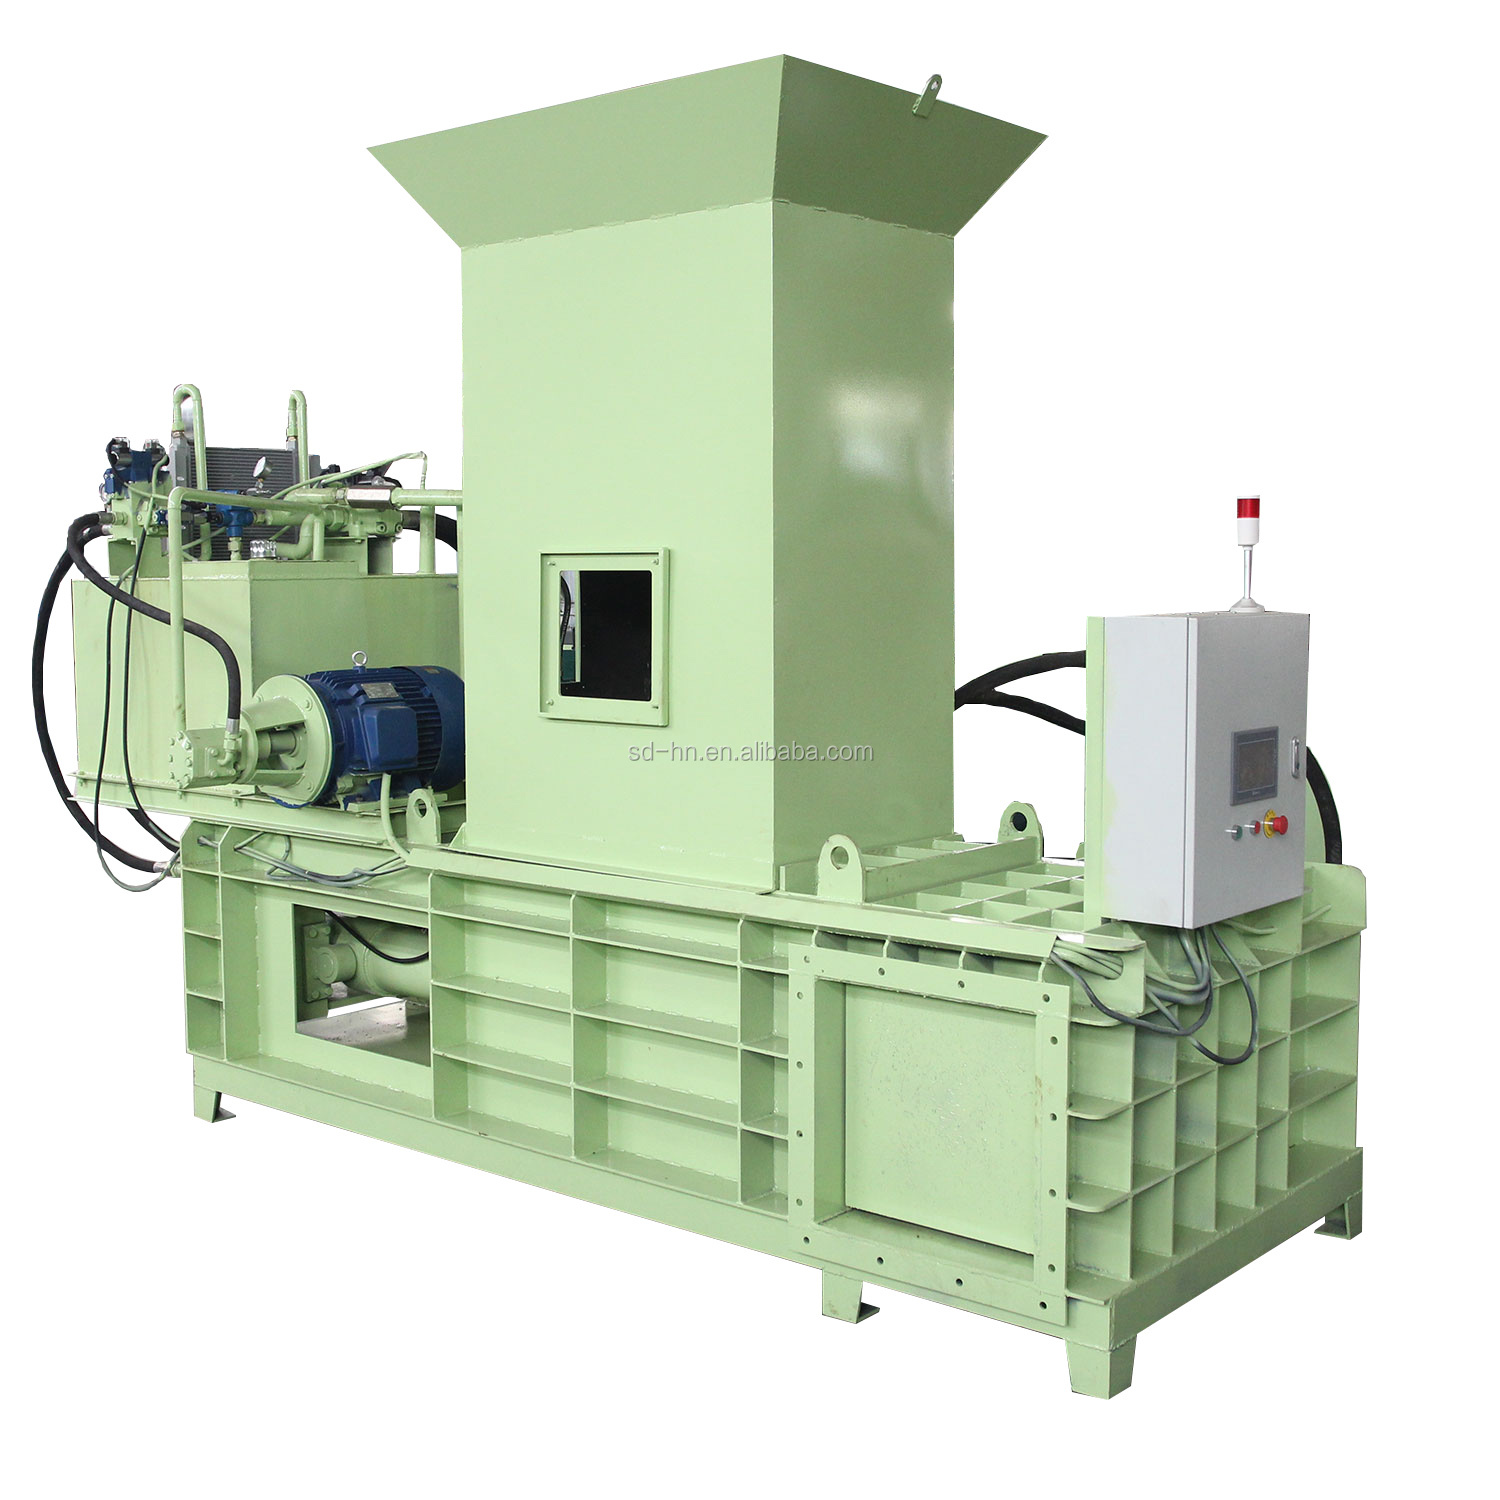 RD Automatic horizontal hydraulic baler for binding fibers into bundles in textile waste recycling production line